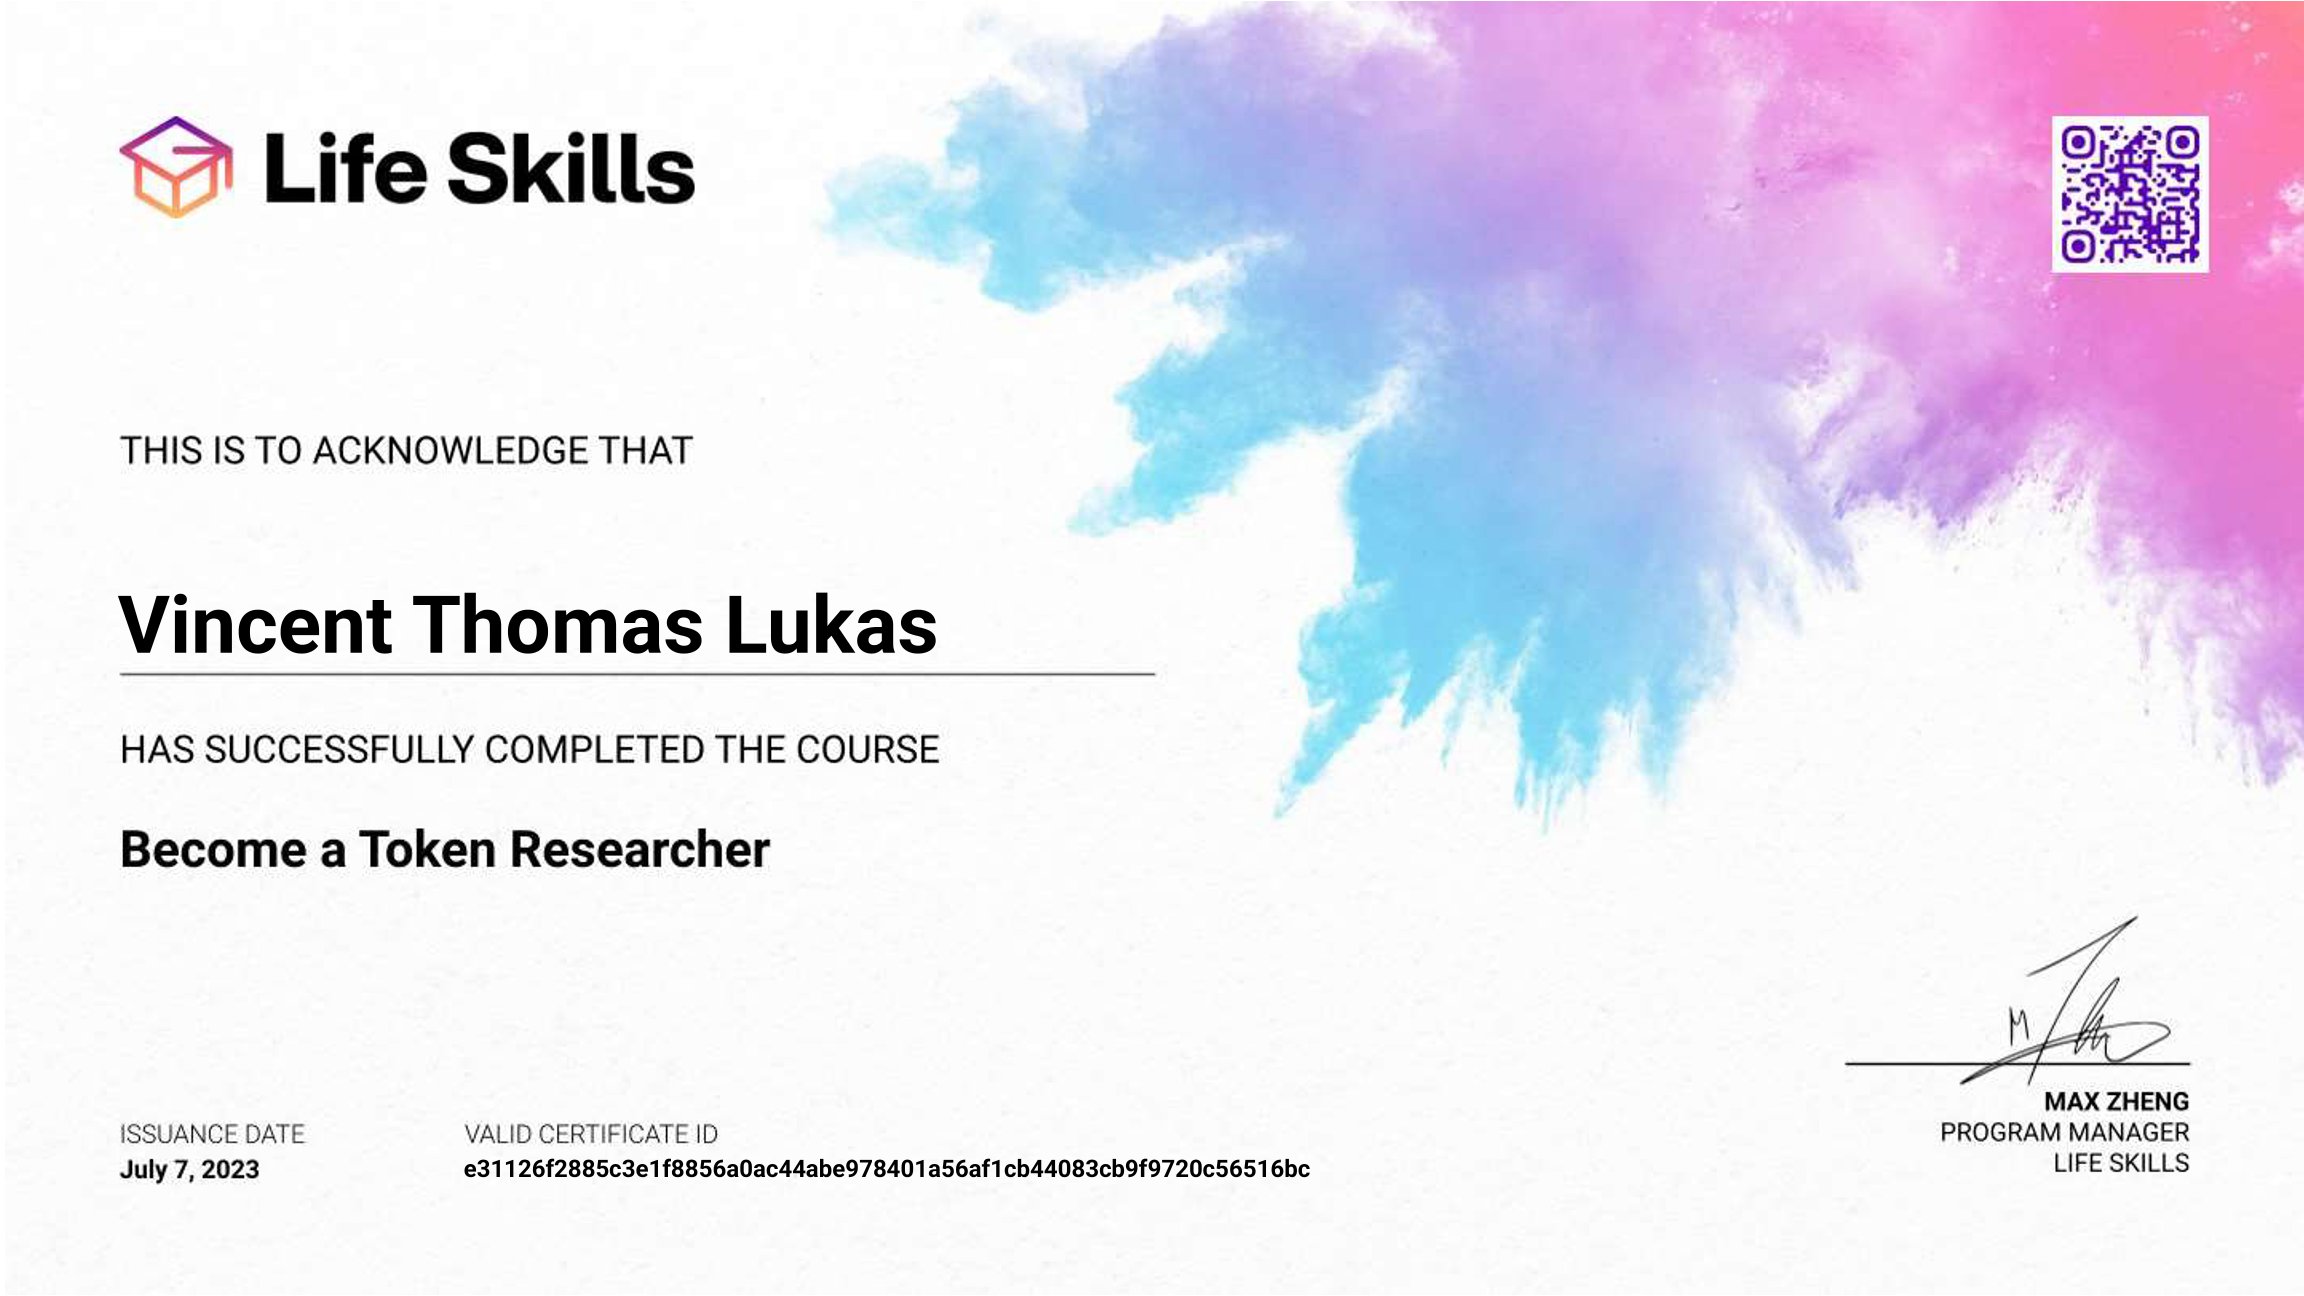 Life Skills - Become a Token Researcher - Vincent Thomas Lukas - Certificate